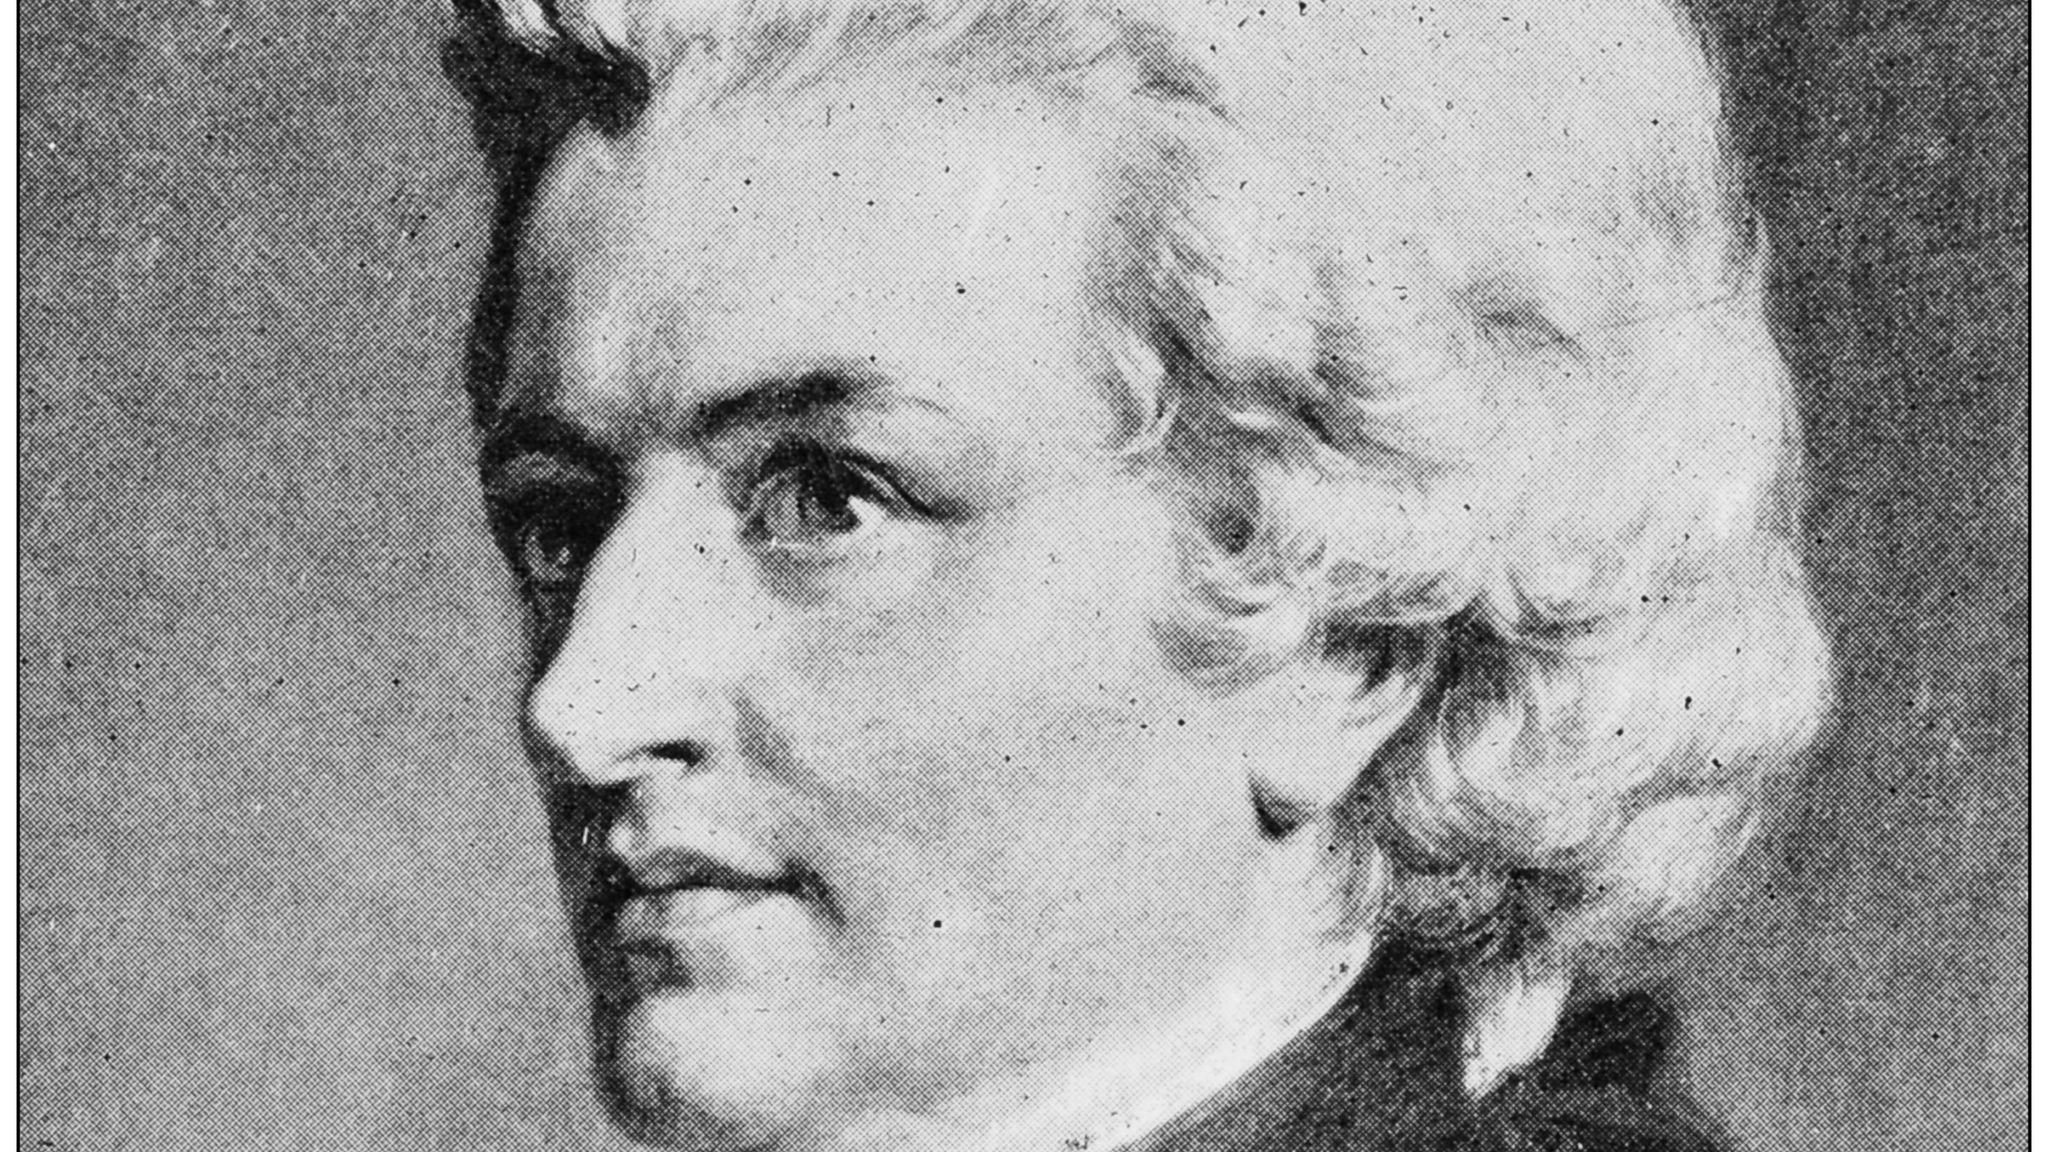 What killed Mozart? Strep, study suggests